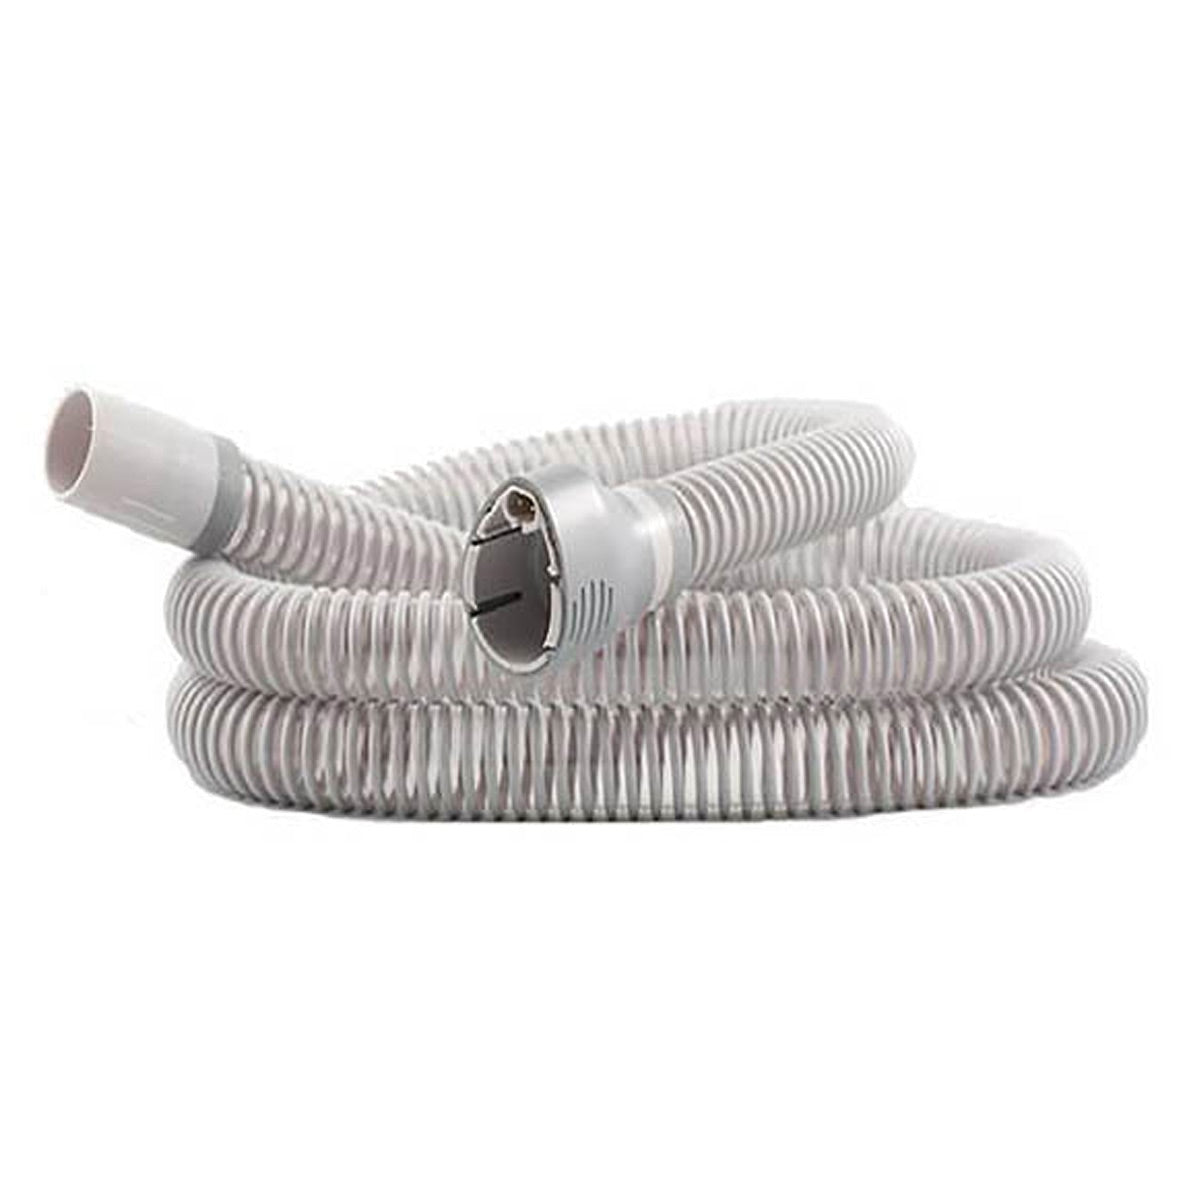 ThermoSmart Heated Tubing for SleepStyle 600 Series CPAP Machines (6-Foot)